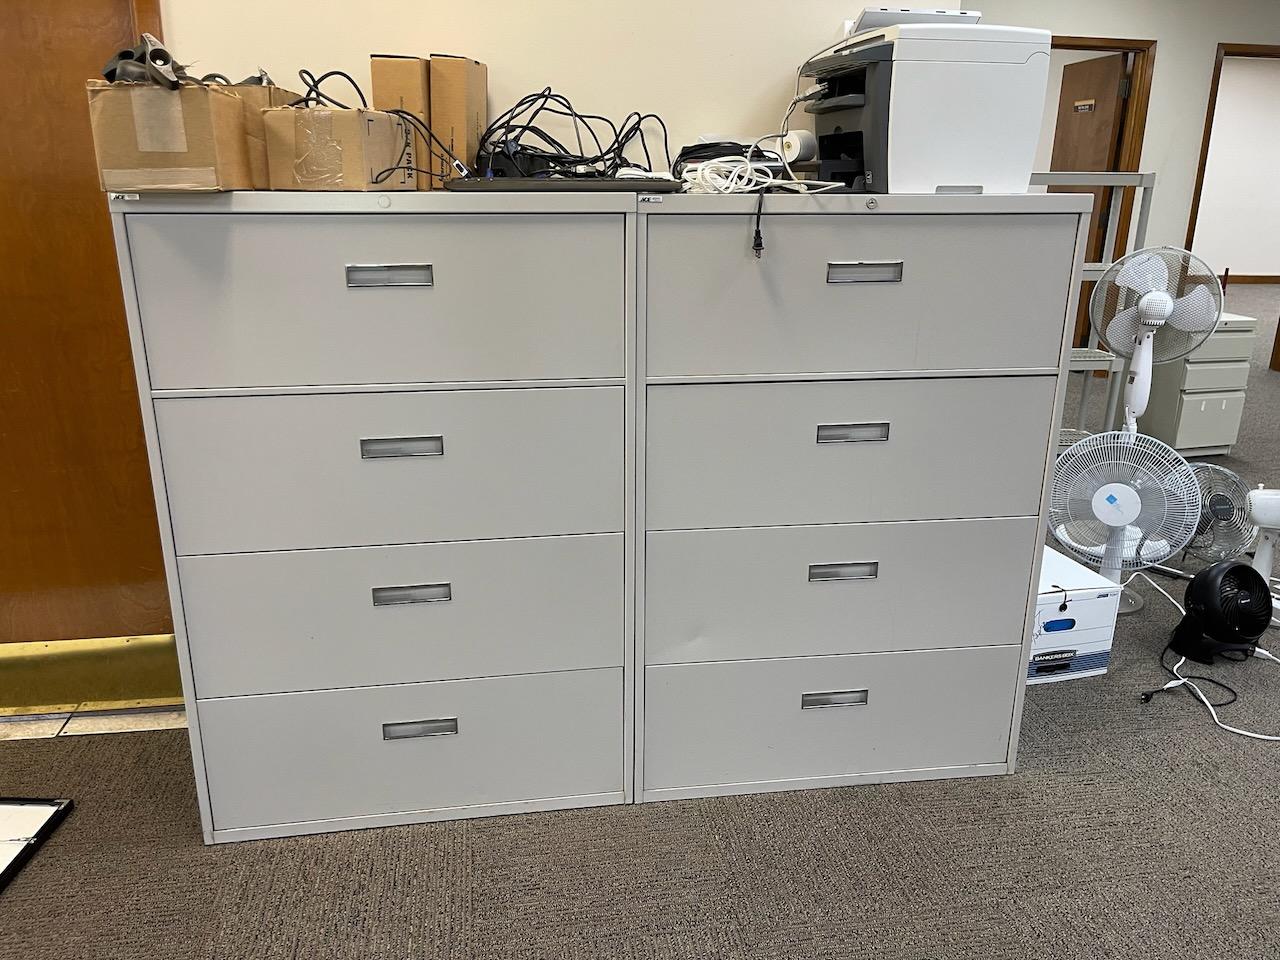 FILE CABINETS - 4 Drawer 36" Wide